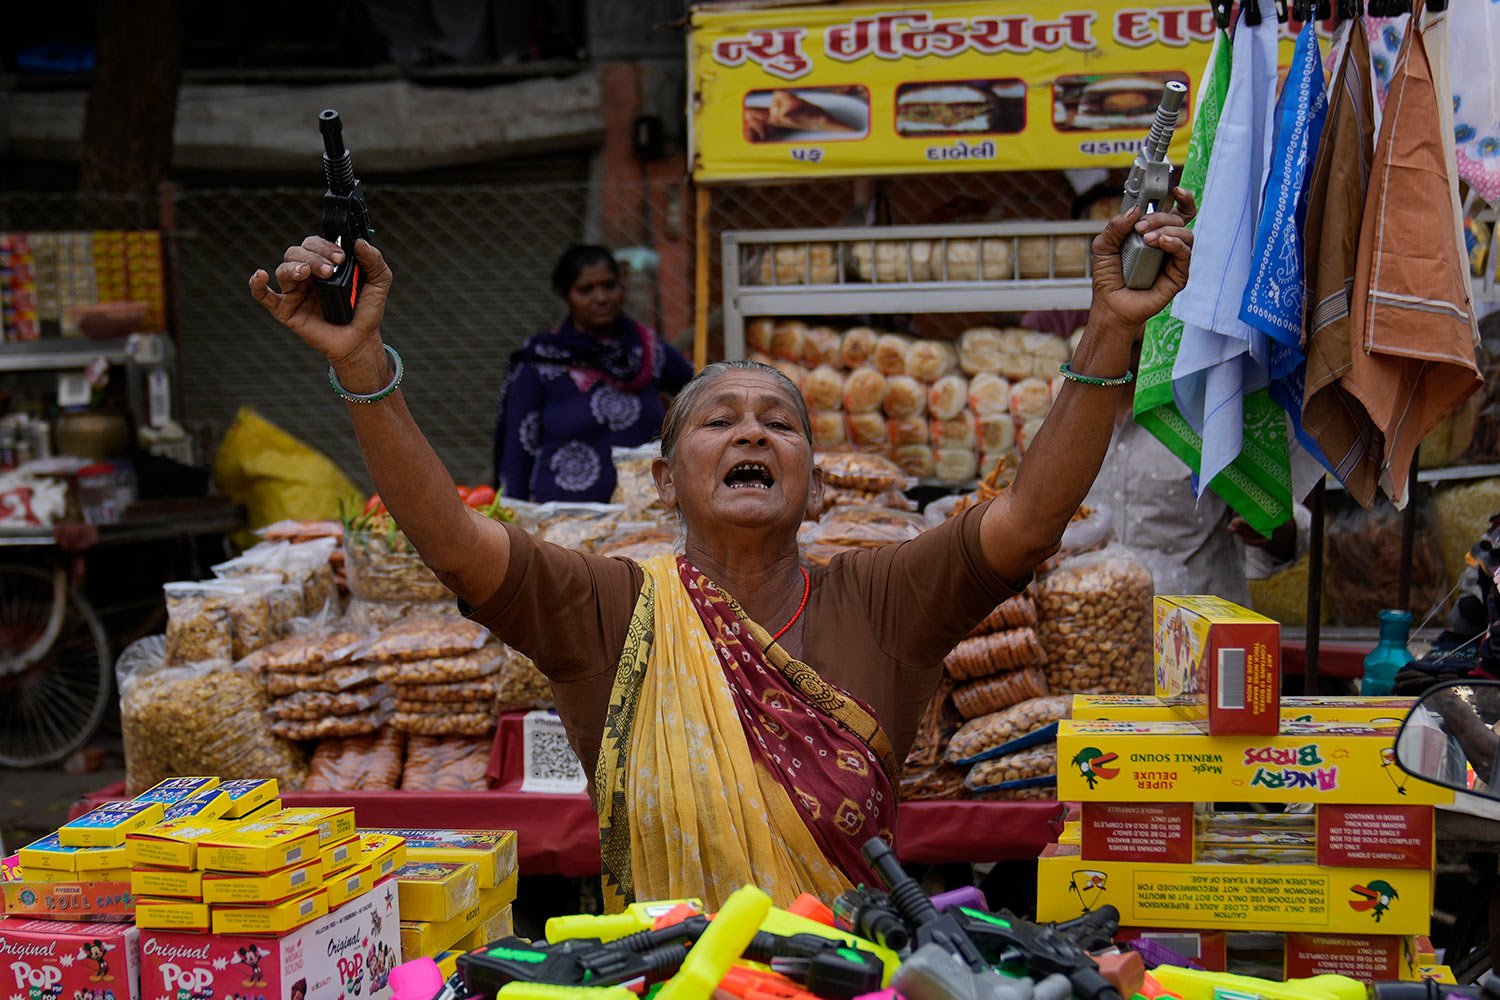  A street vendor woman selling firecracker toy guns tries to attract customers in Ahmedabad, India, Sunday, Nov. 5, 2023. (AP Photo/Mahesh Kumar A.) 